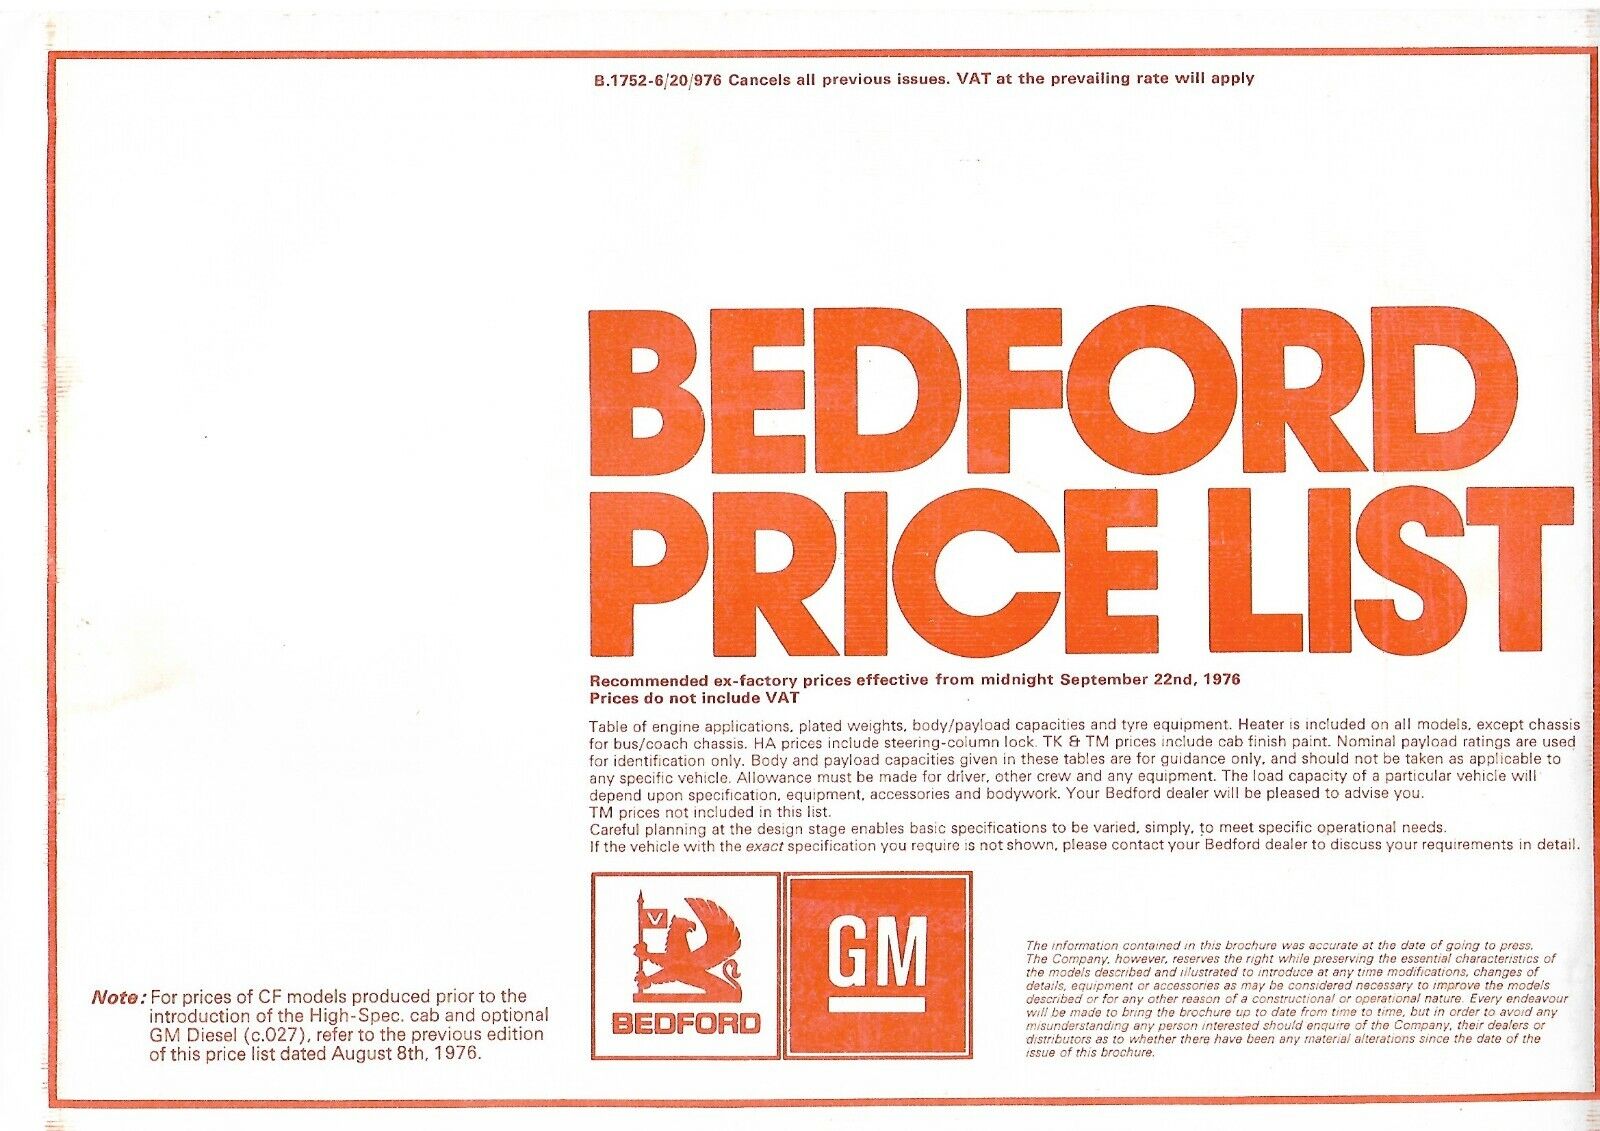 Truck Price List - Bedford - Commercial Vehicle Specifications Data 1976 (T3634)